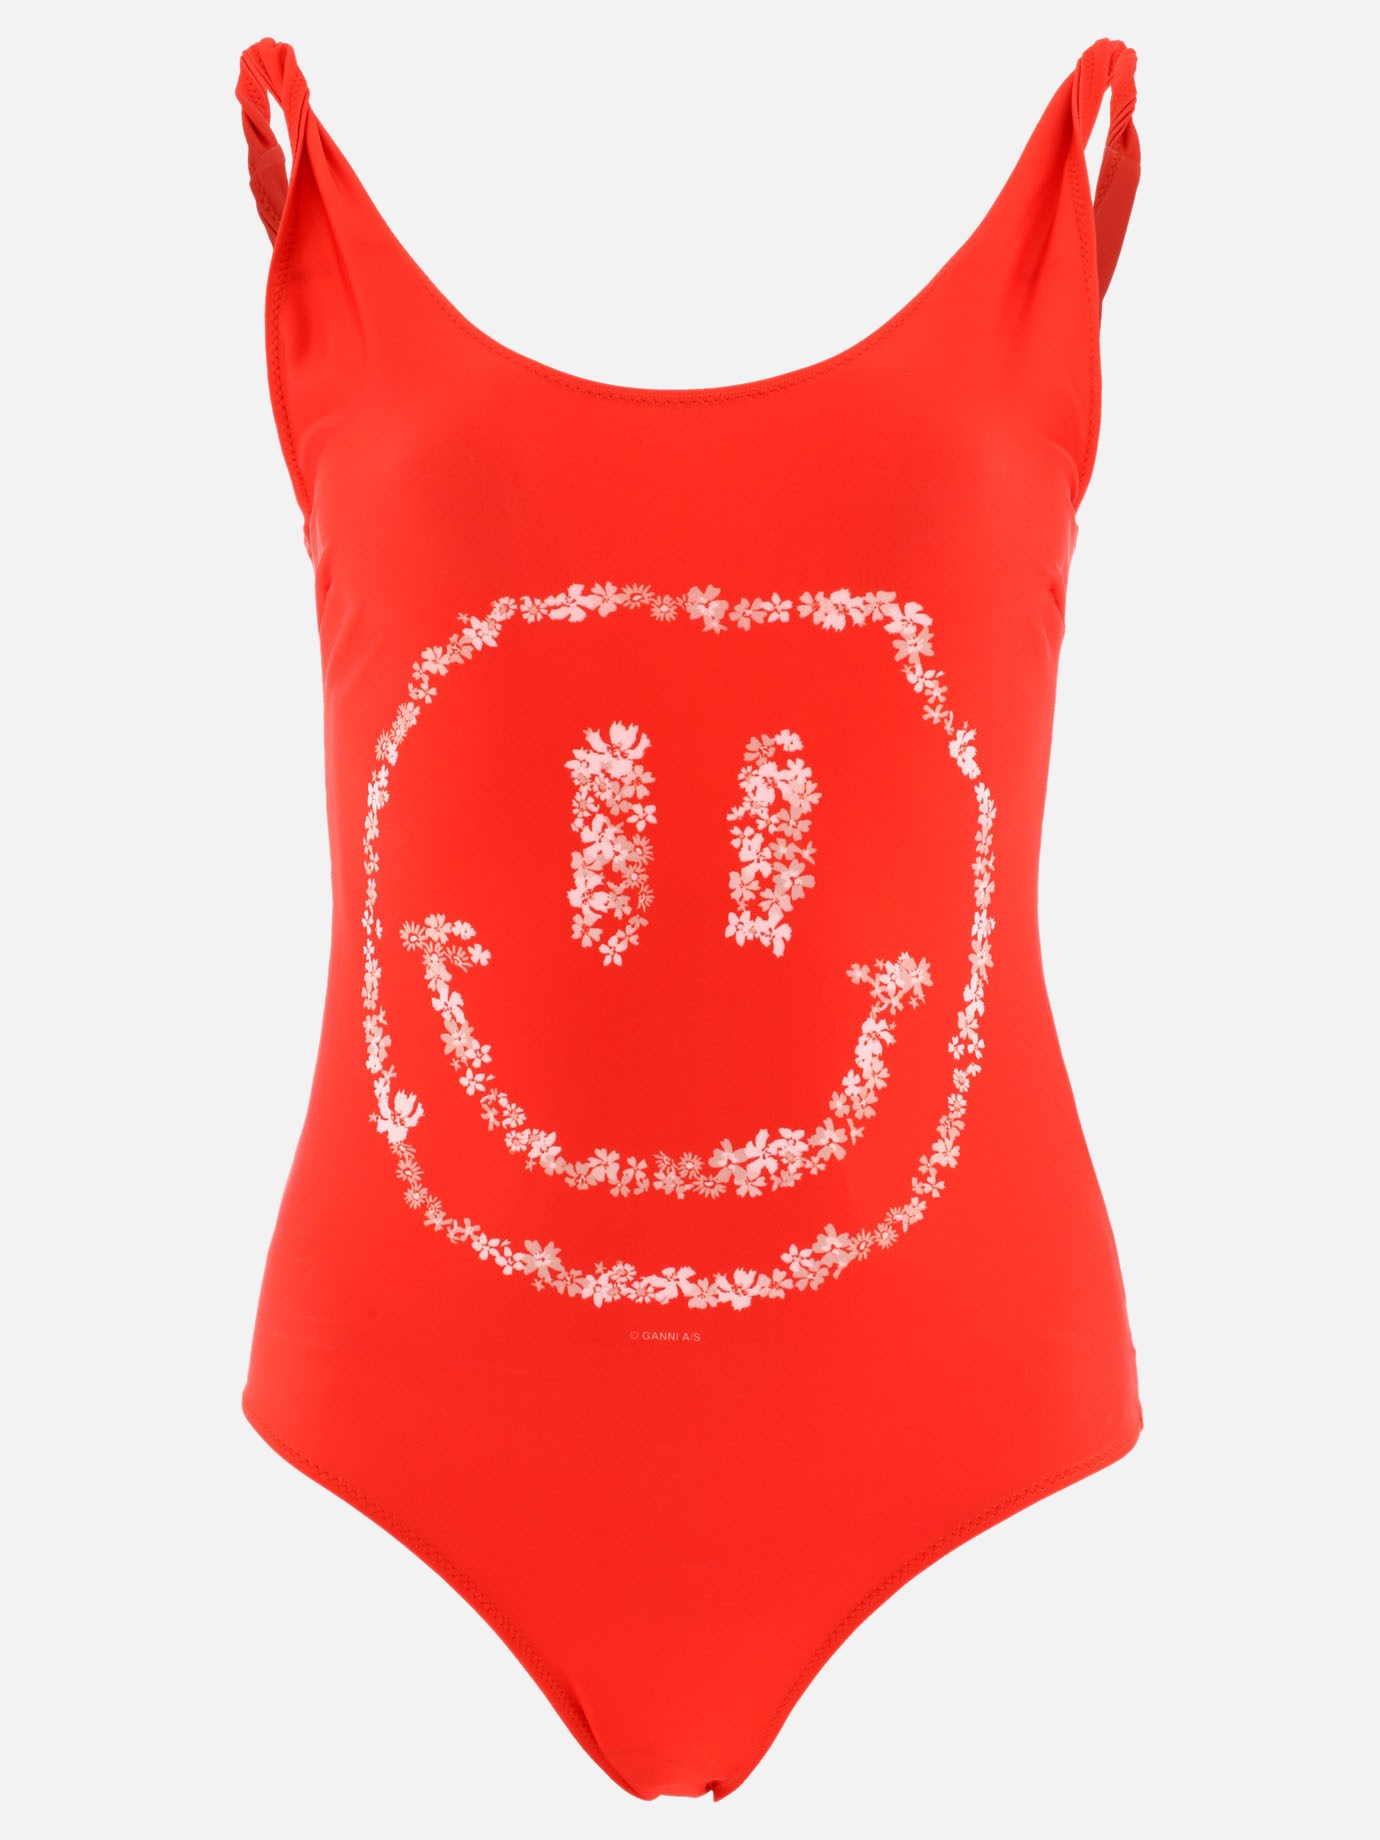  Smiley  swimsuit by Ganni